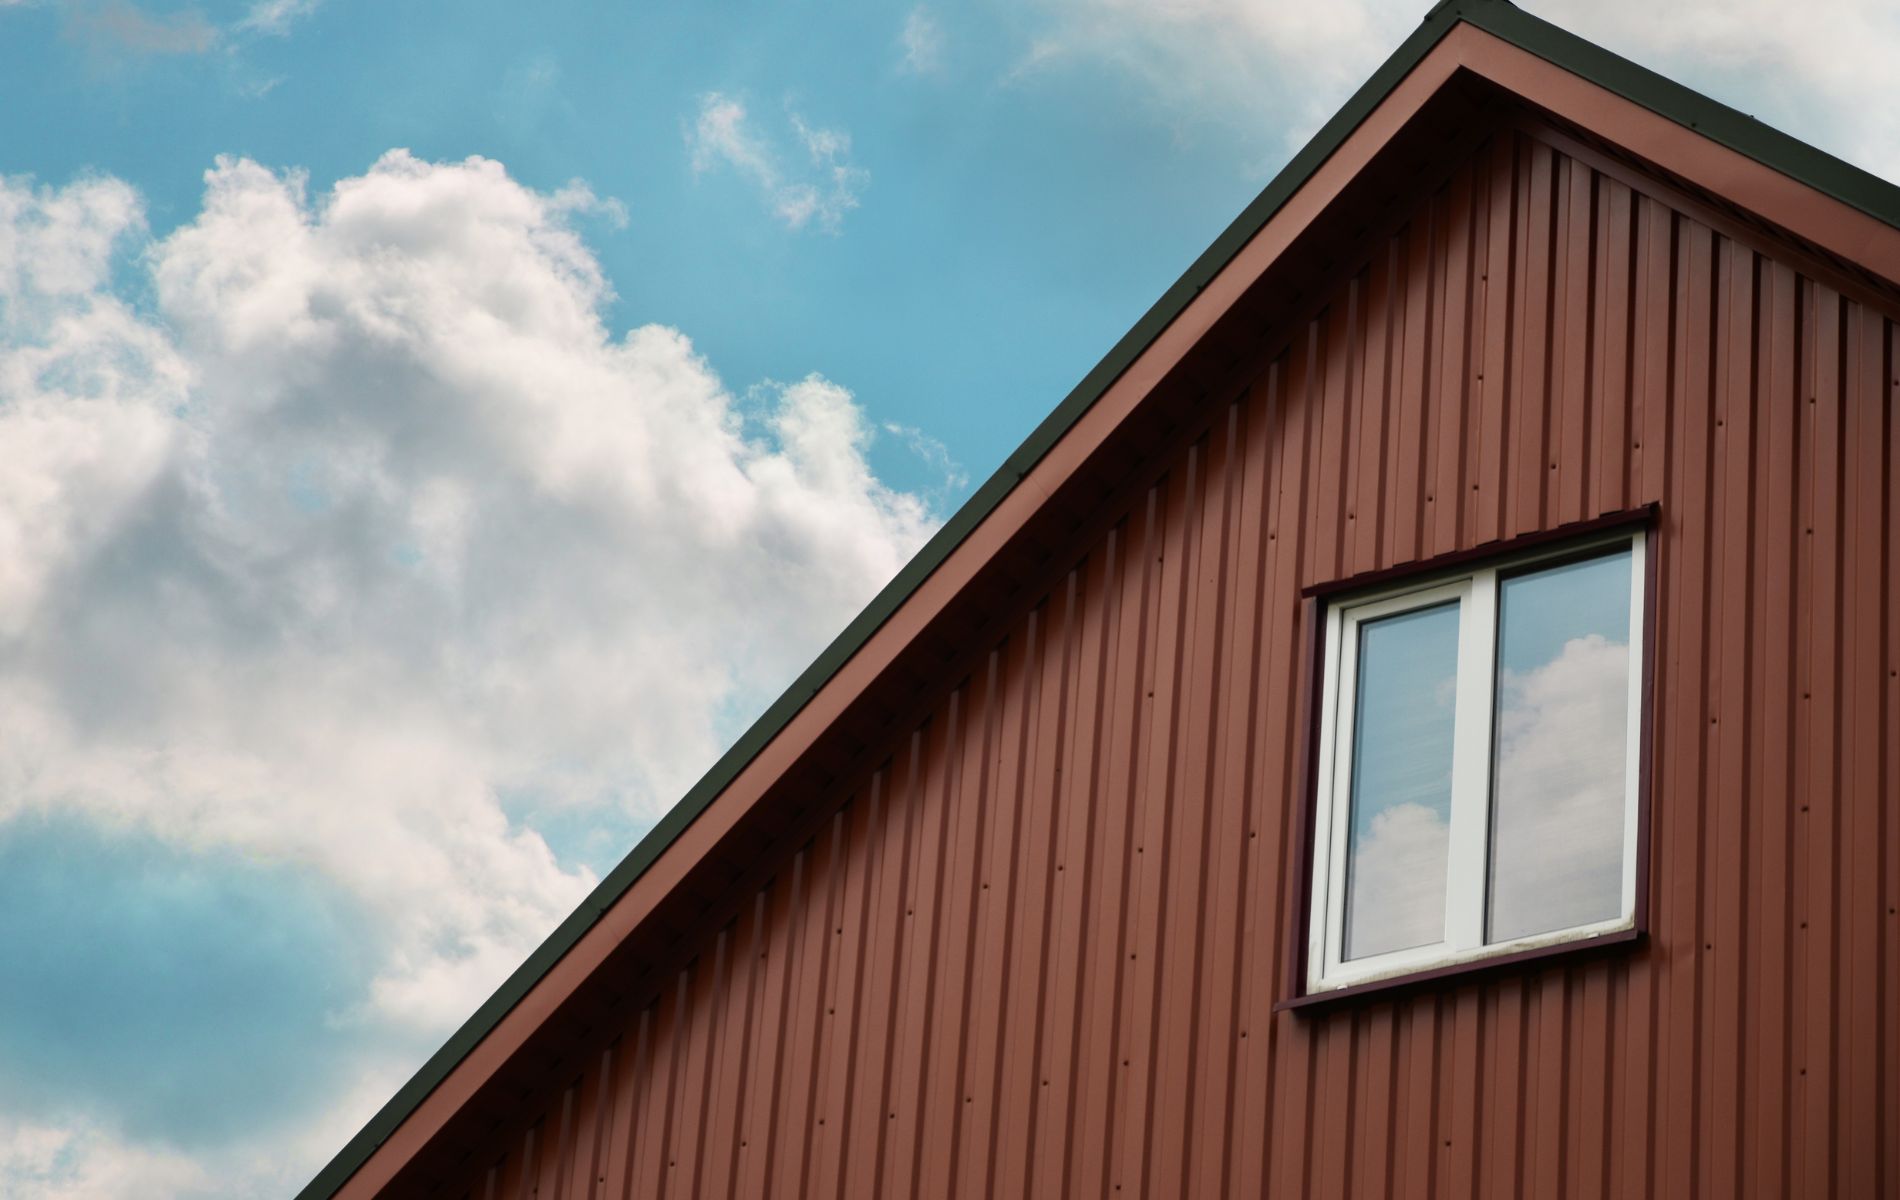 Some Advantages of Vertical Exterior Siding